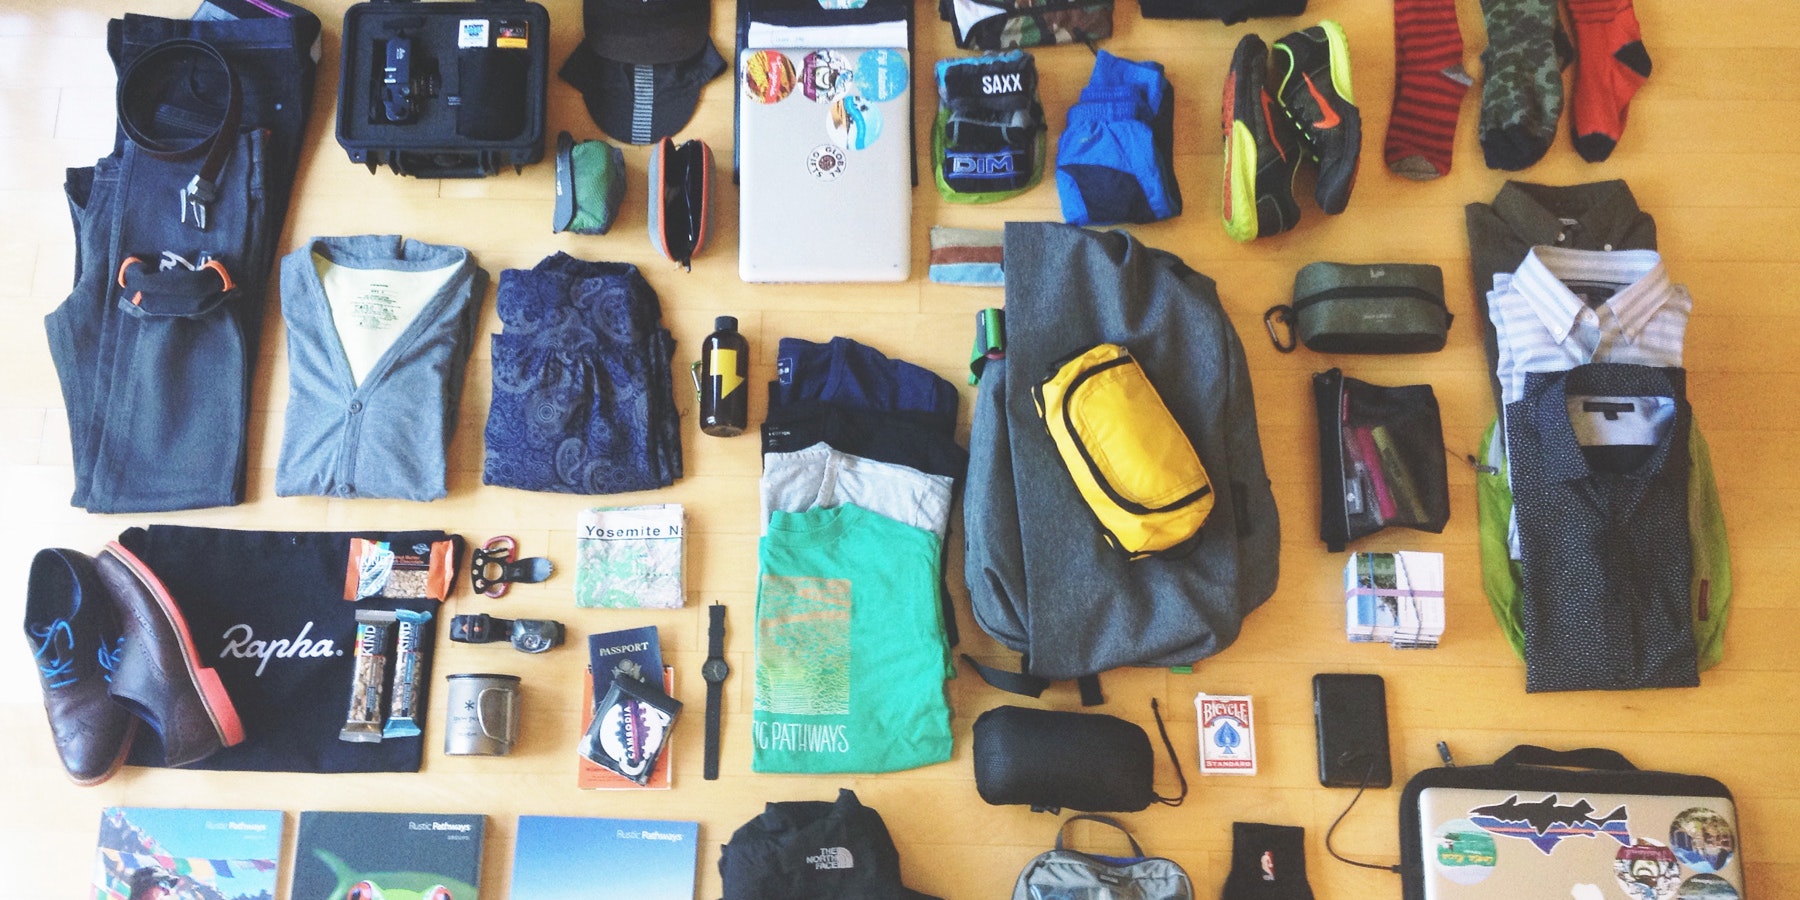 A Travel Checklist: What to Pack for a Student Trip